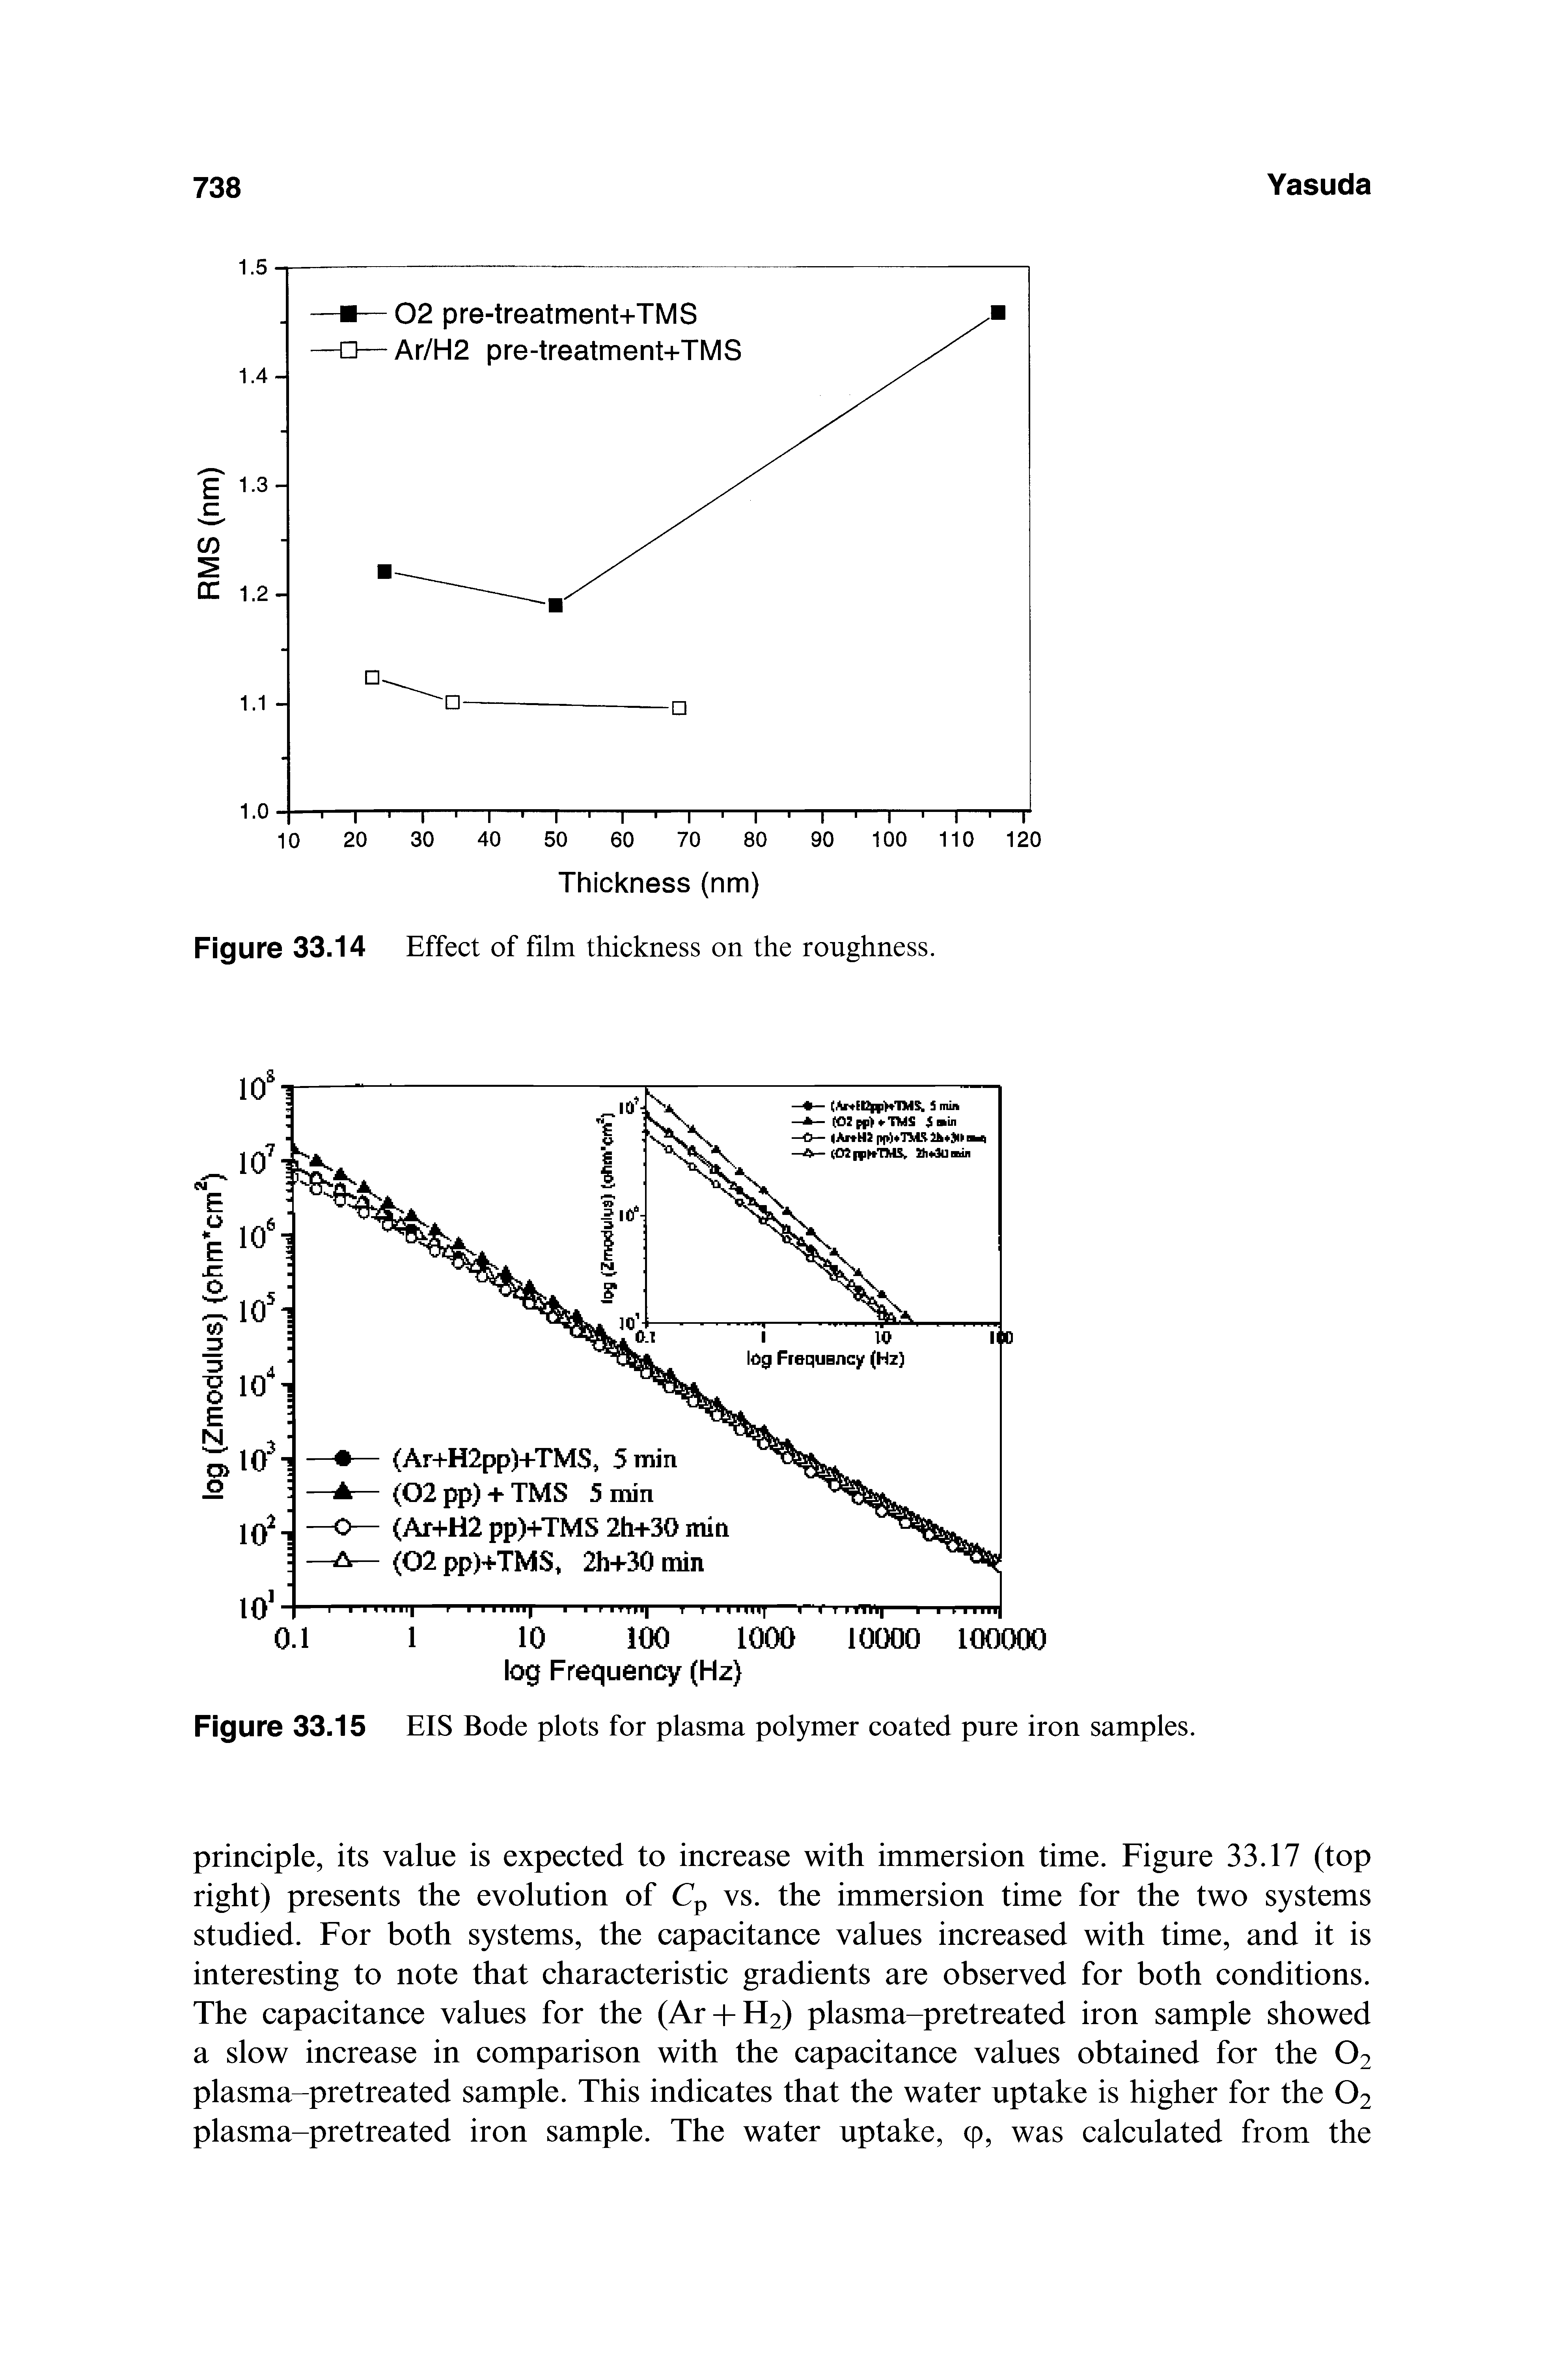 Figure 33.15 EIS Bode plots for plasma polymer coated pure iron samples.